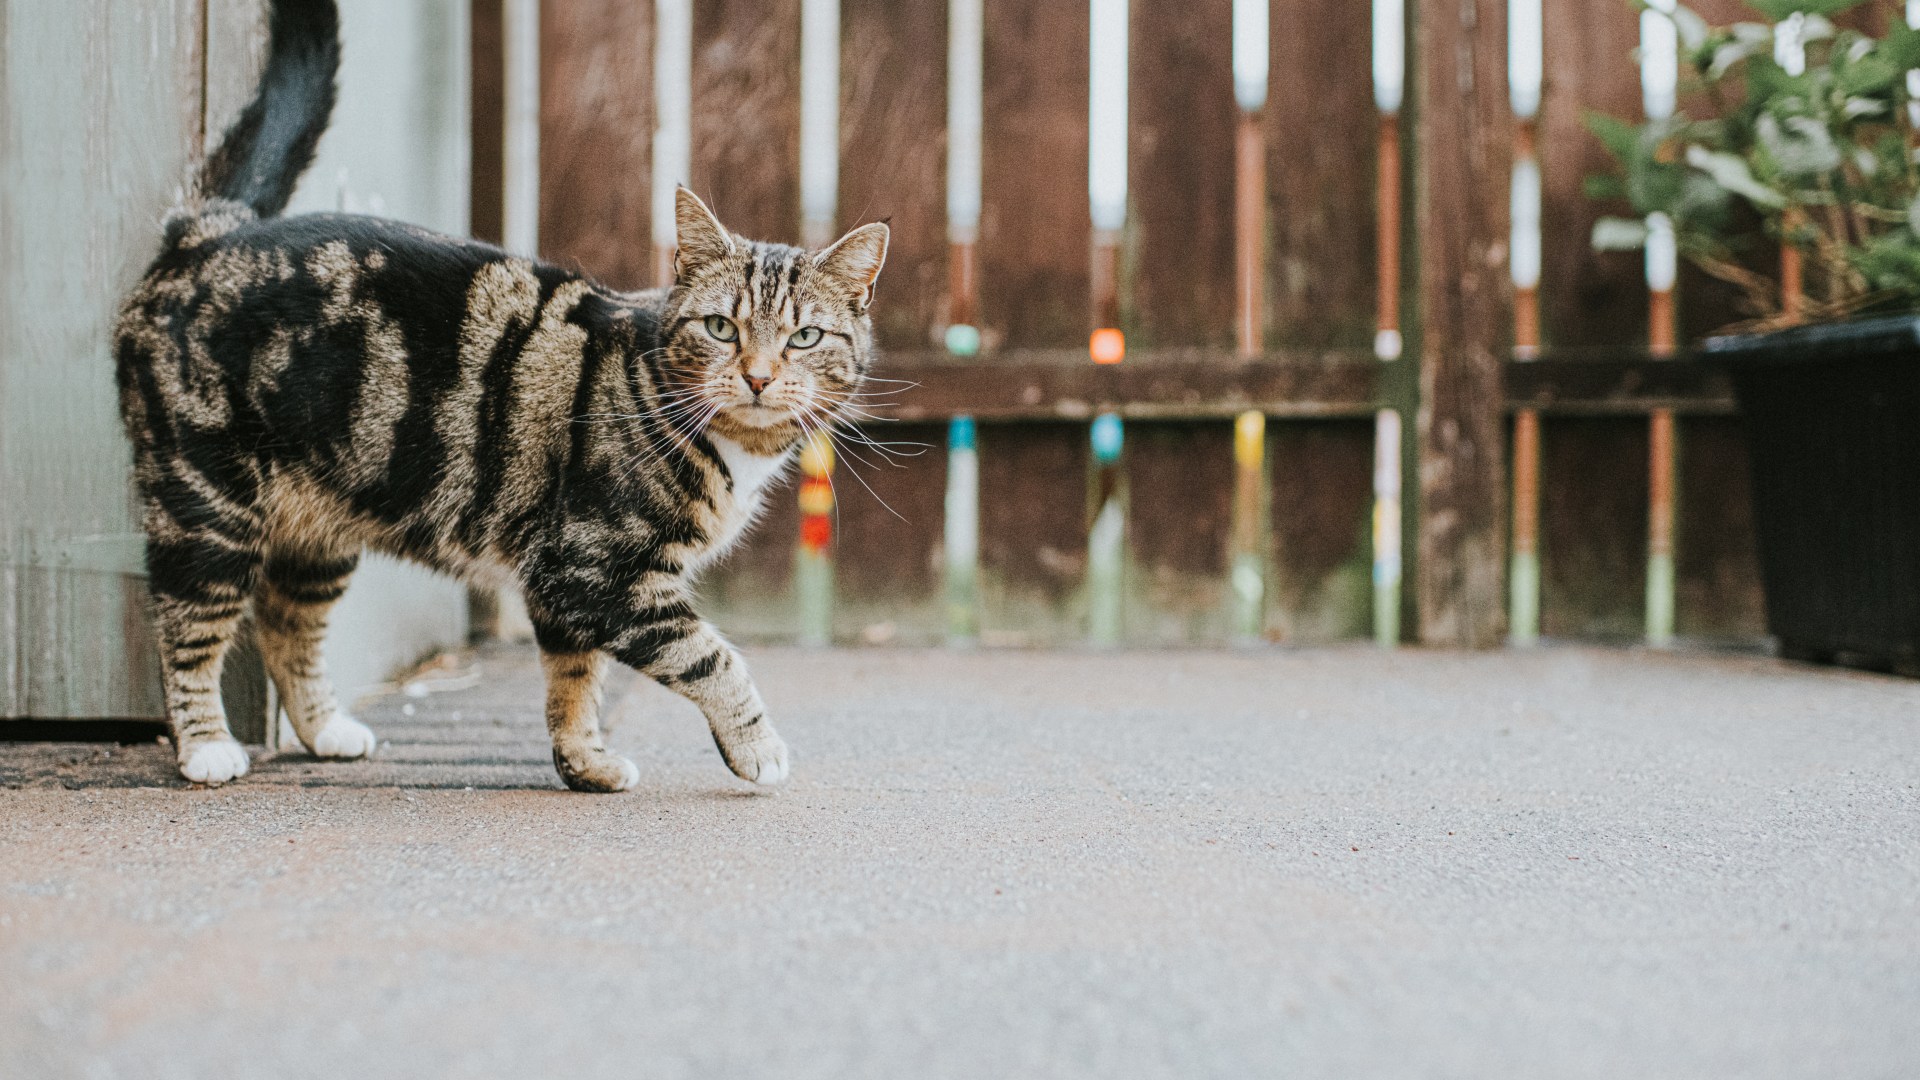 Is it illegal to feed stray cats in your garden? [Video]